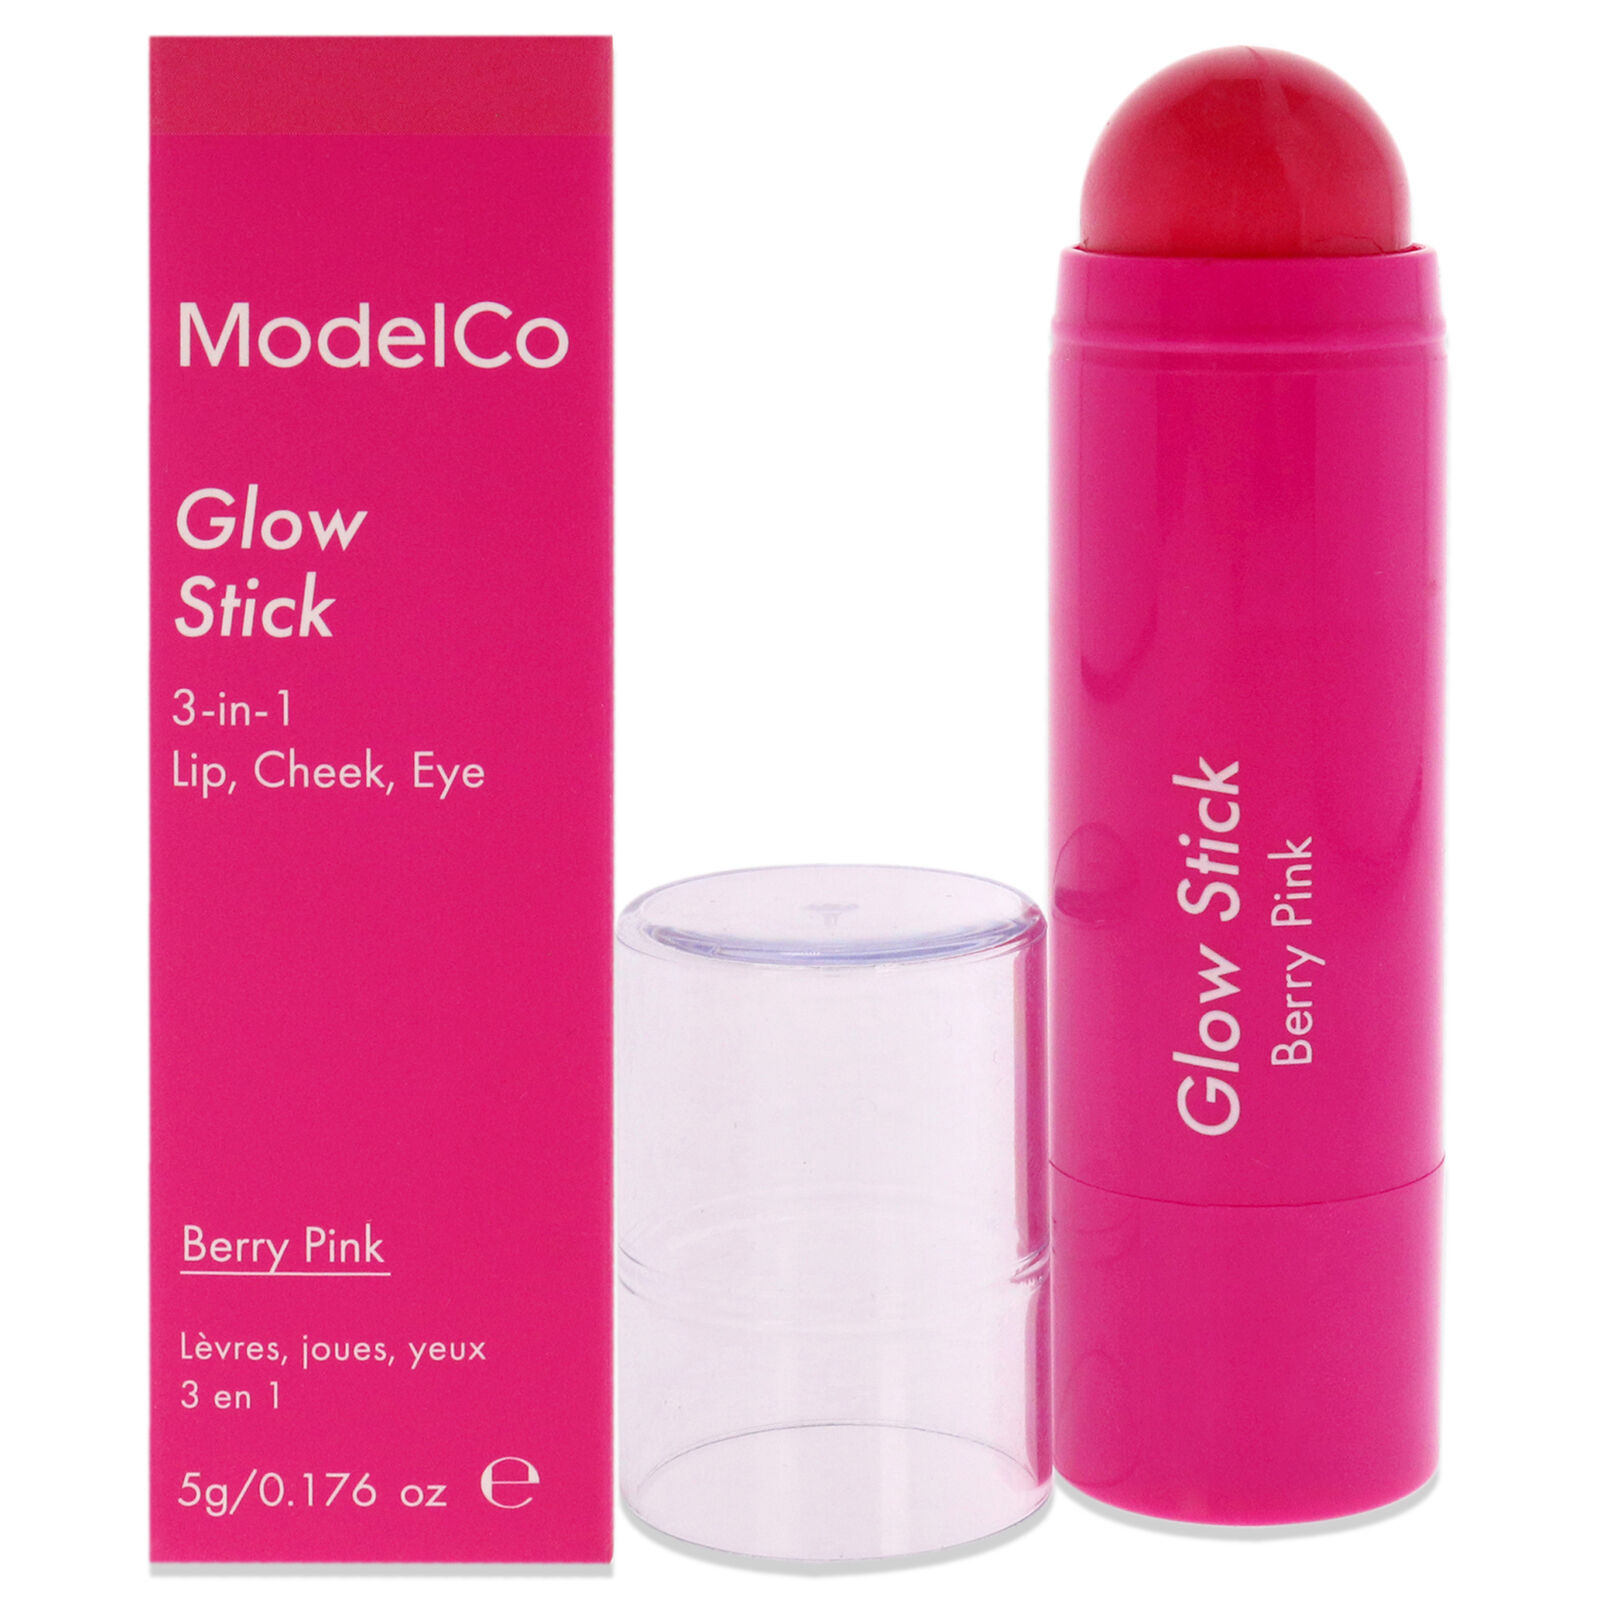 Glow Stick 3-in-1 - Berry Pink By Modelco For Women - 0.176 Oz Makeup